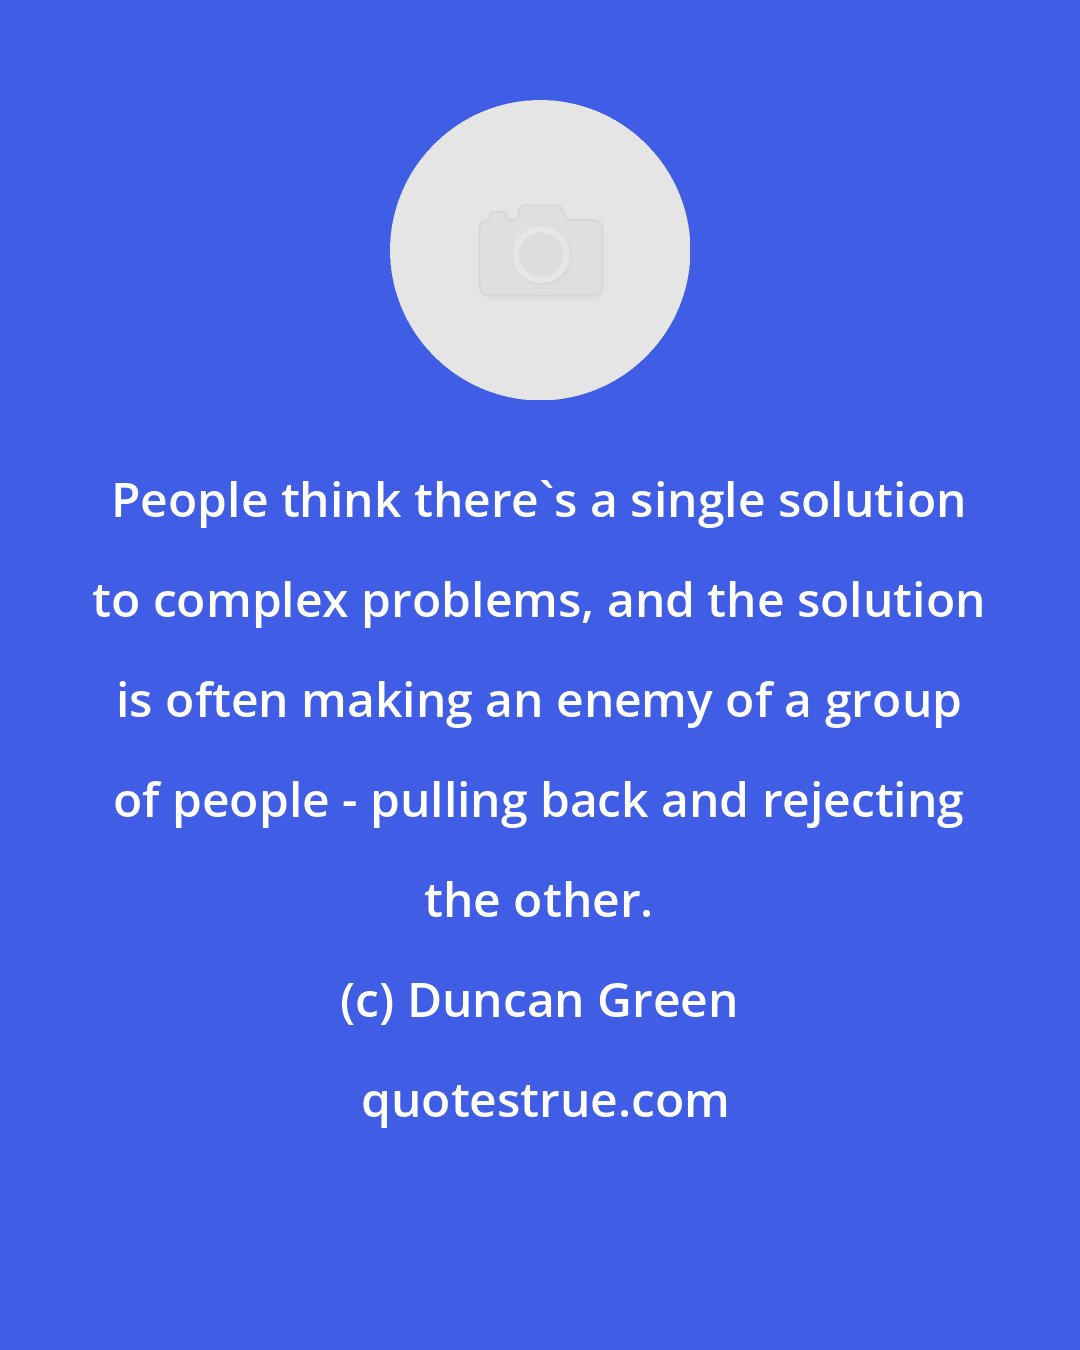 Duncan Green: People think there's a single solution to complex problems, and the solution is often making an enemy of a group of people - pulling back and rejecting the other.